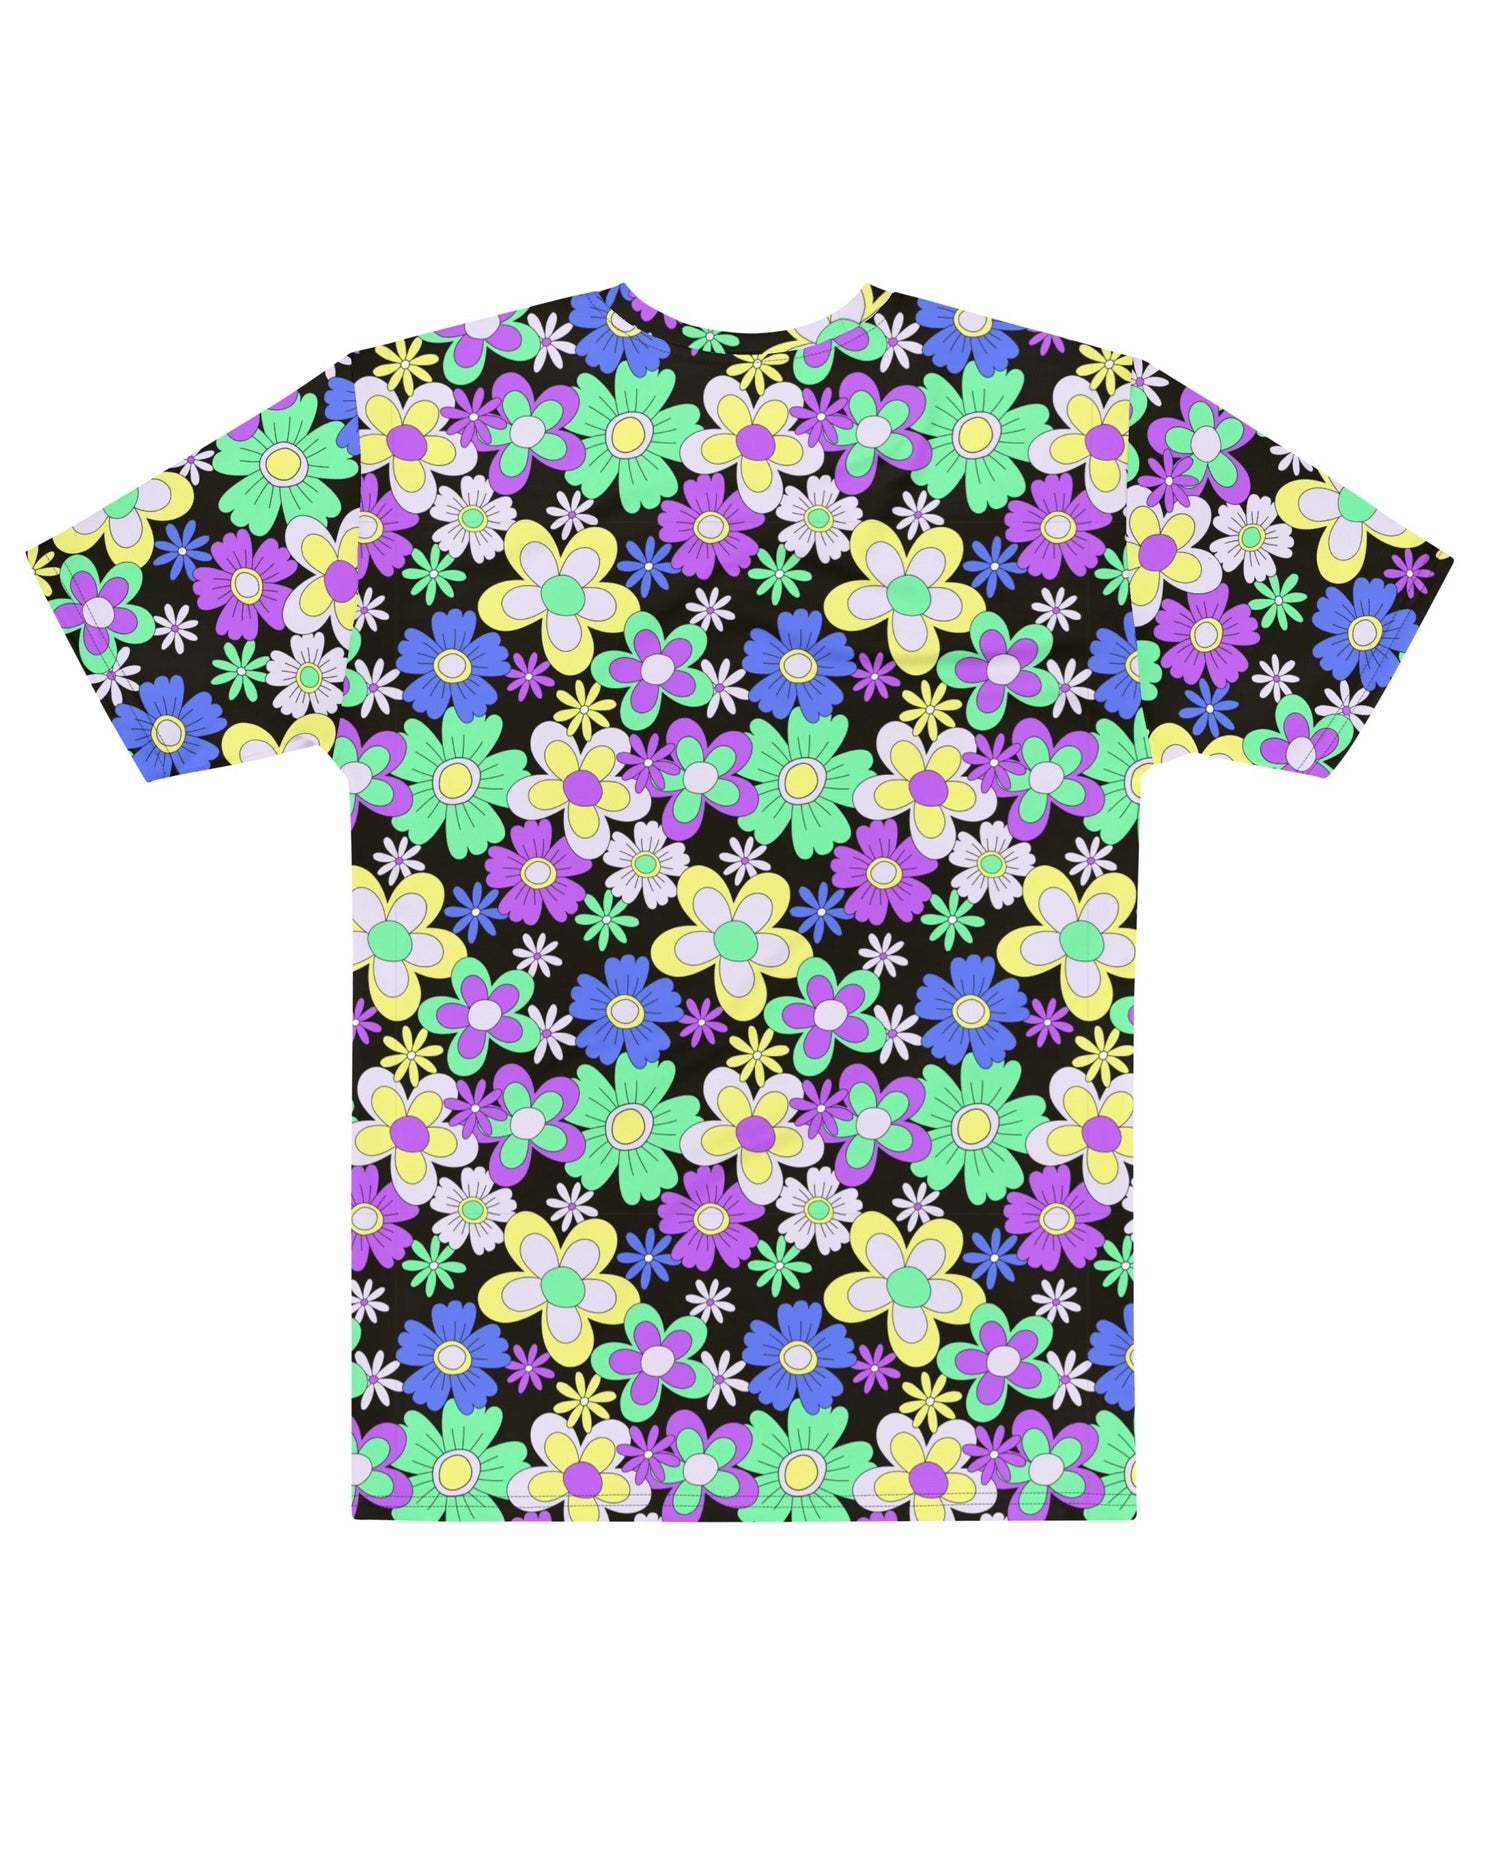 Crazy Daisy T-Shirt, T-Shirt, - One Stop Rave